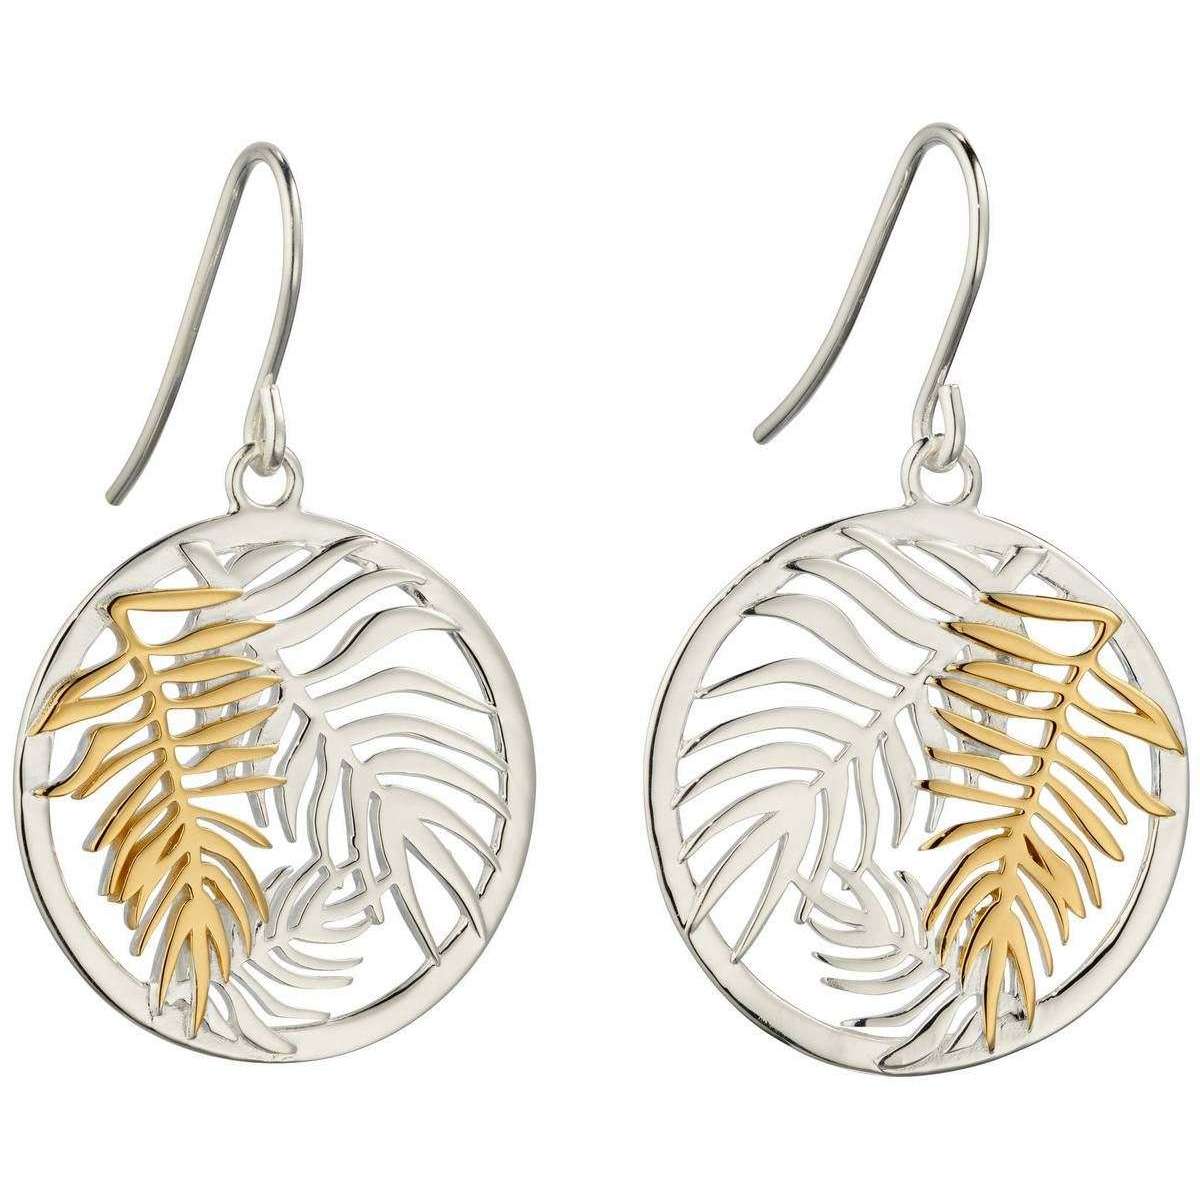 Elements Silver Round Palm Leaf Earrings - Silver/Gold